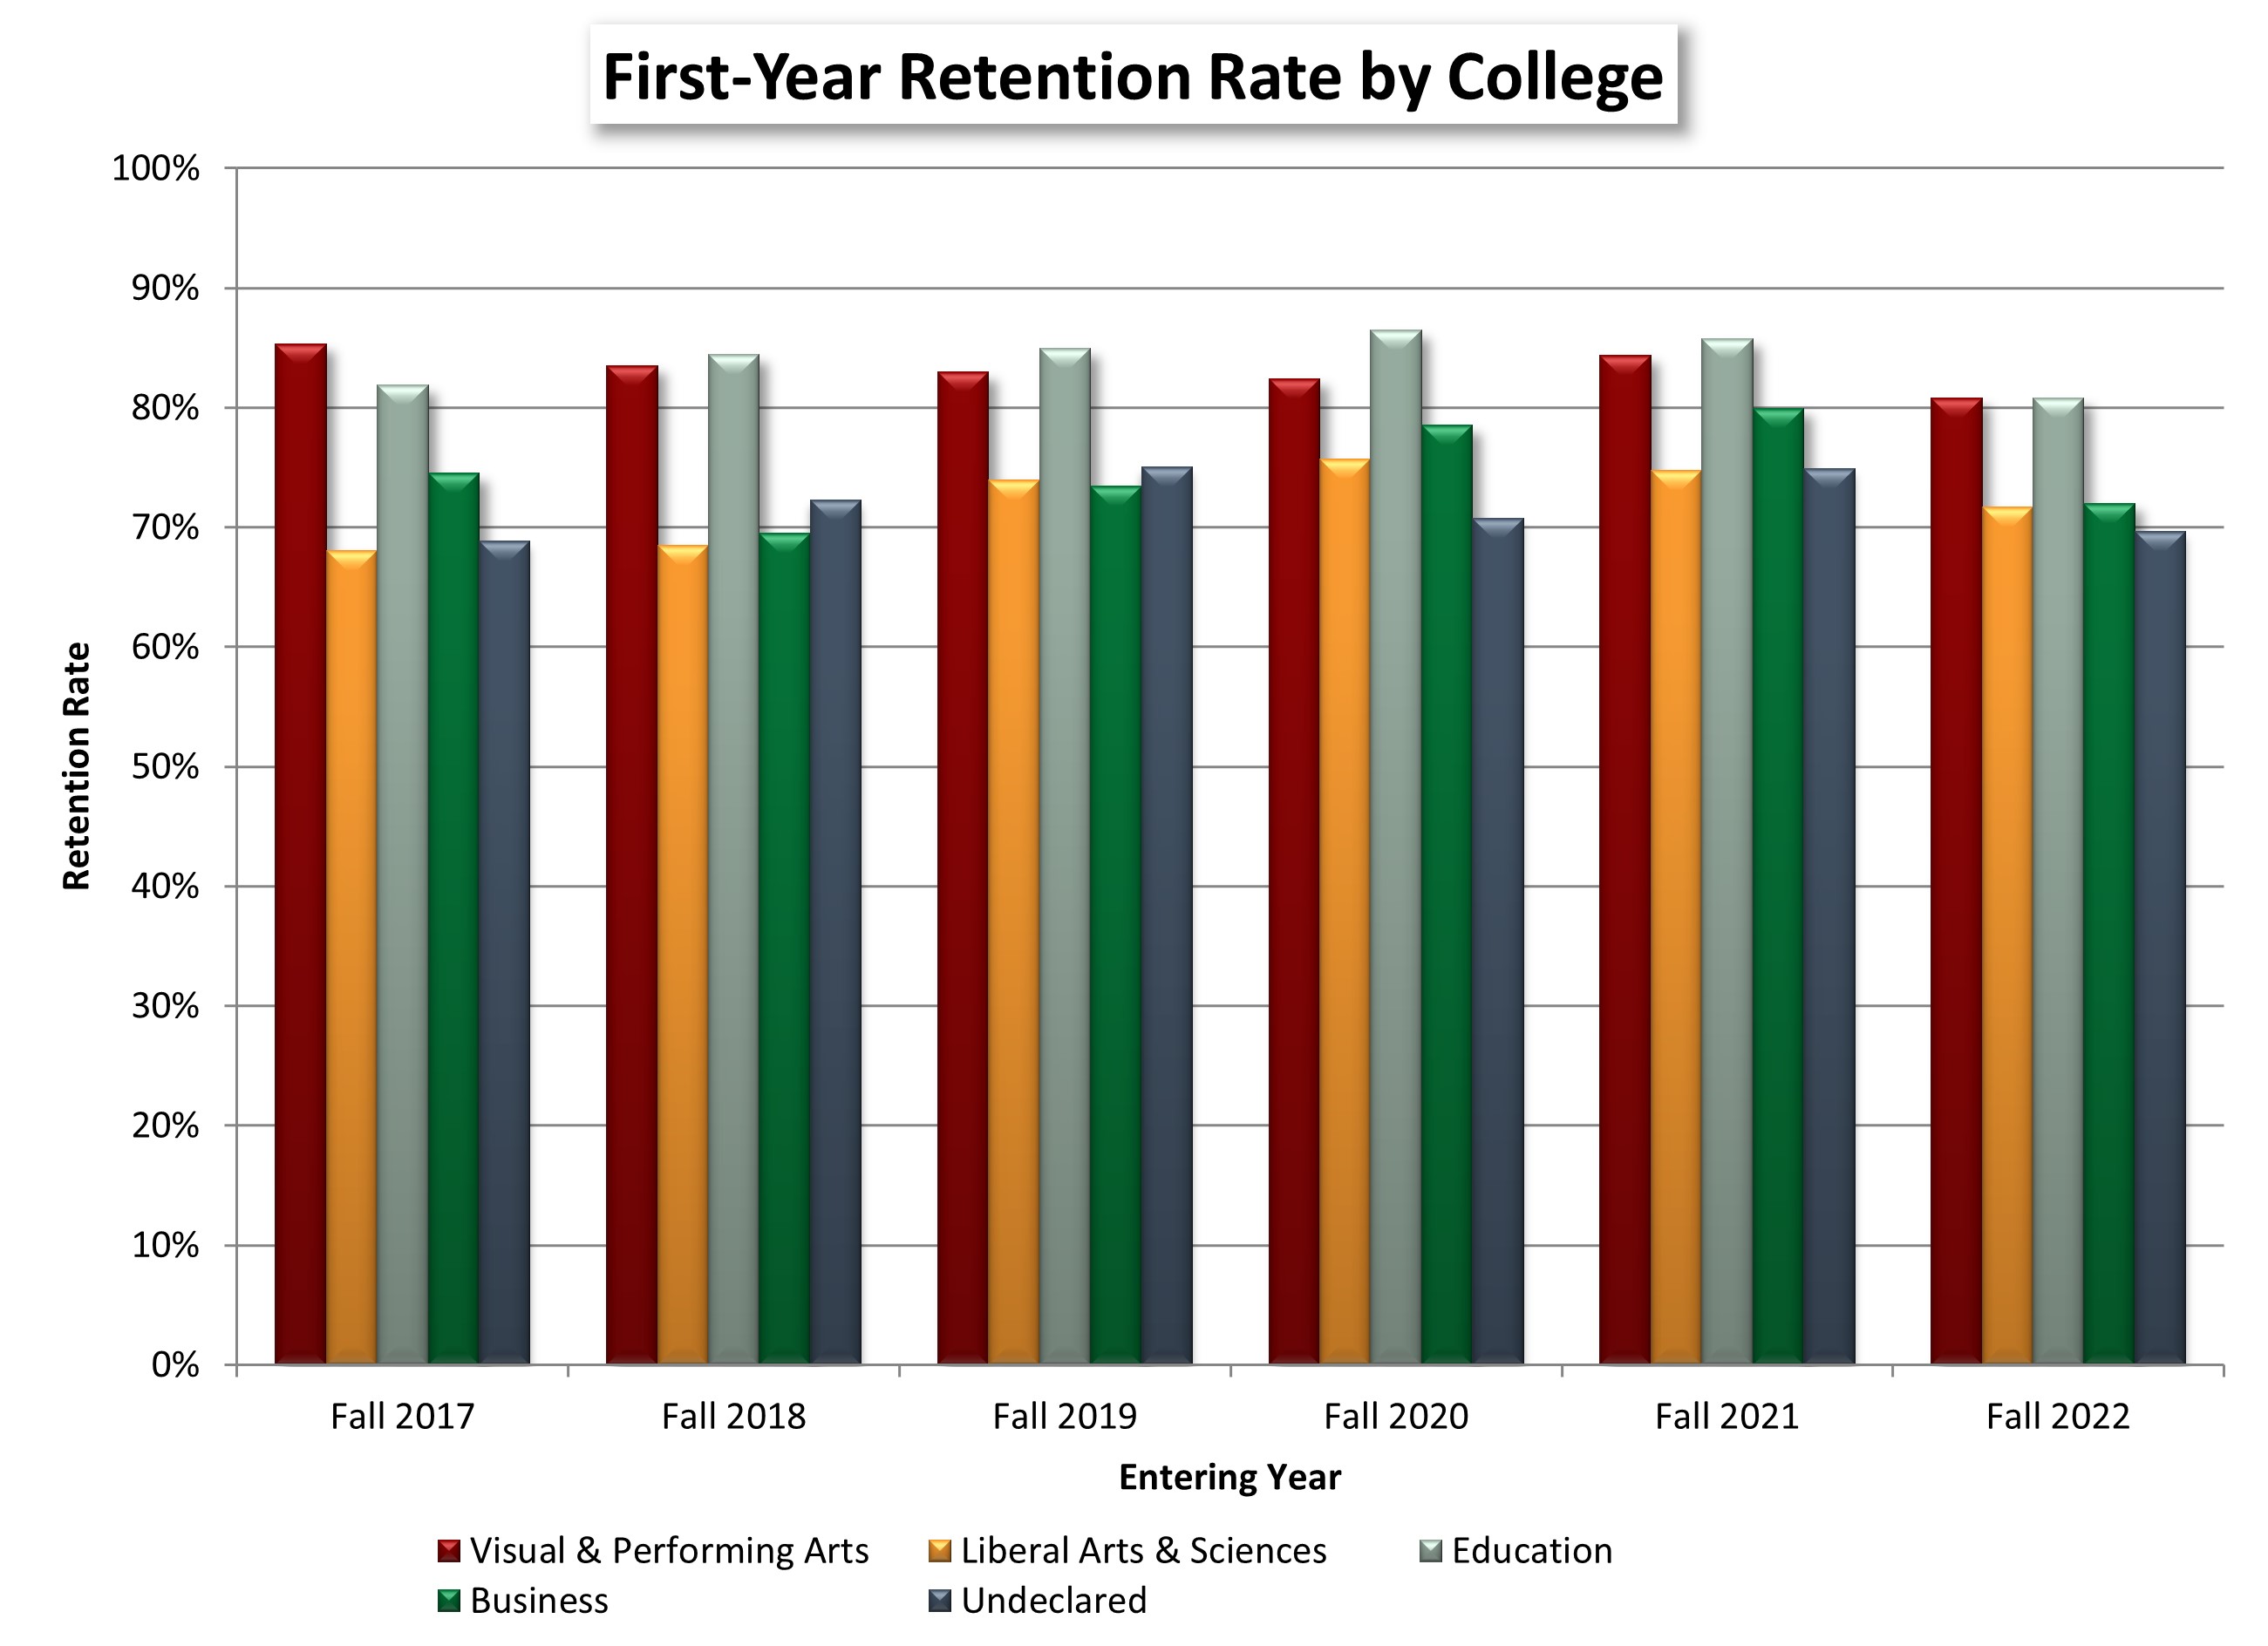 First-Year Retention Rate by College chart